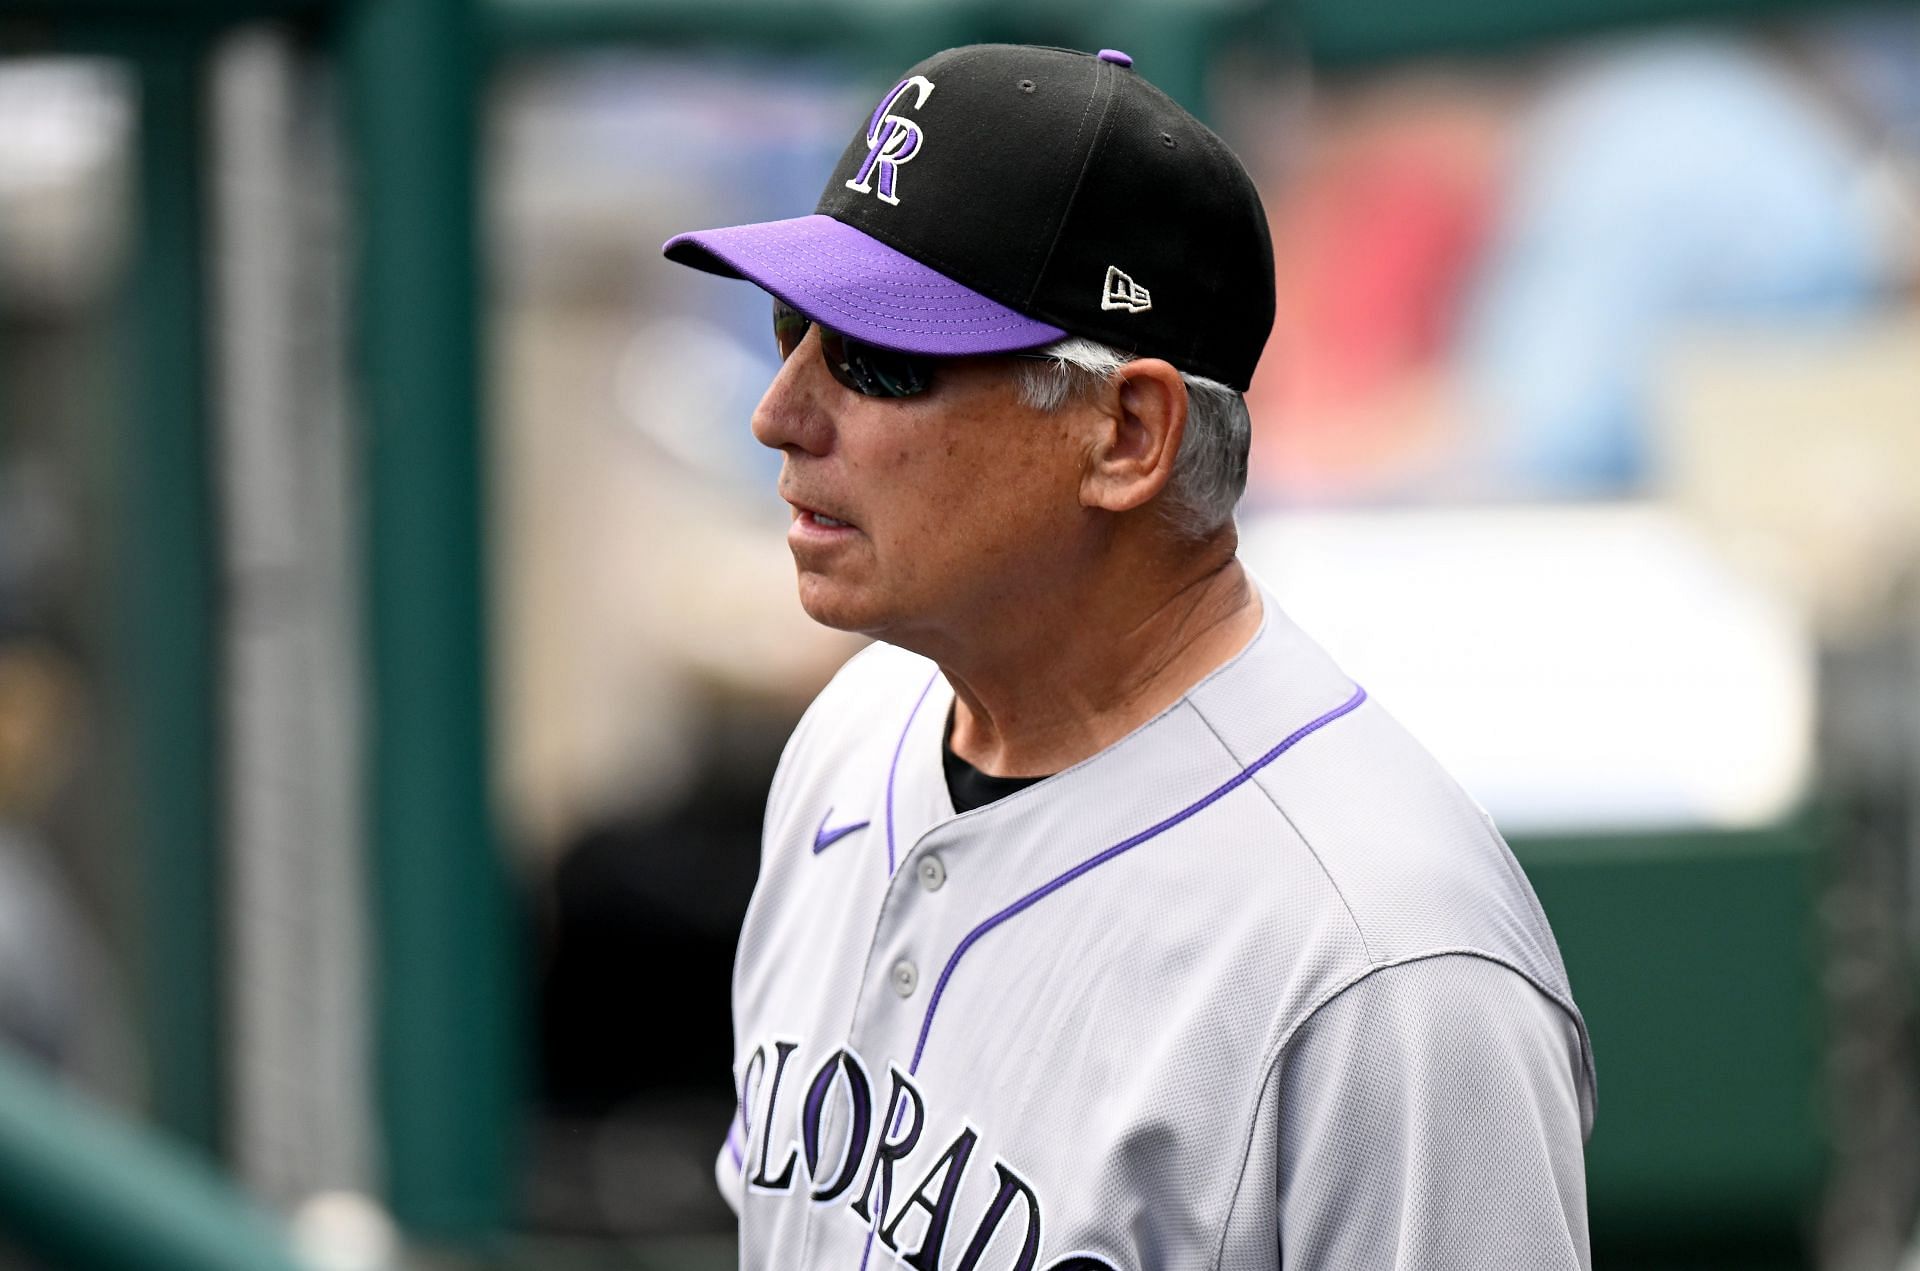 Rockies' Bud Black signs one-year contract extension – The Fort Morgan Times